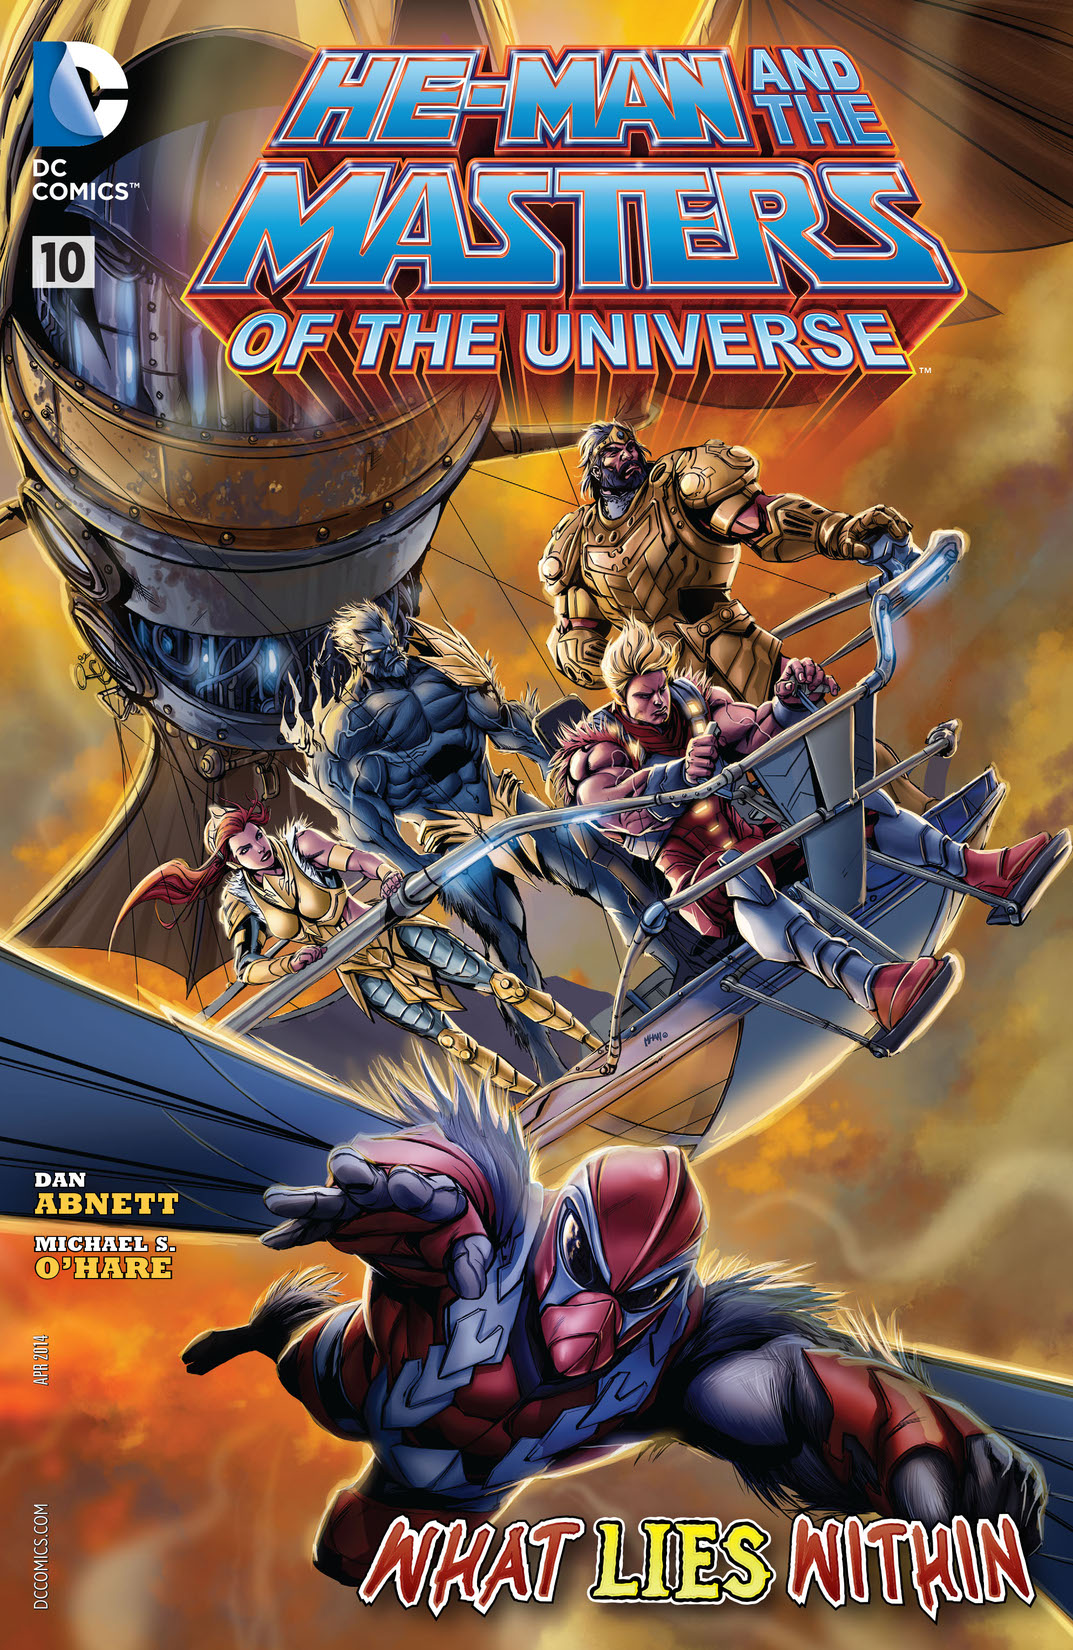 He-Man and the Masters of the Universe (2013-) #10 preview images